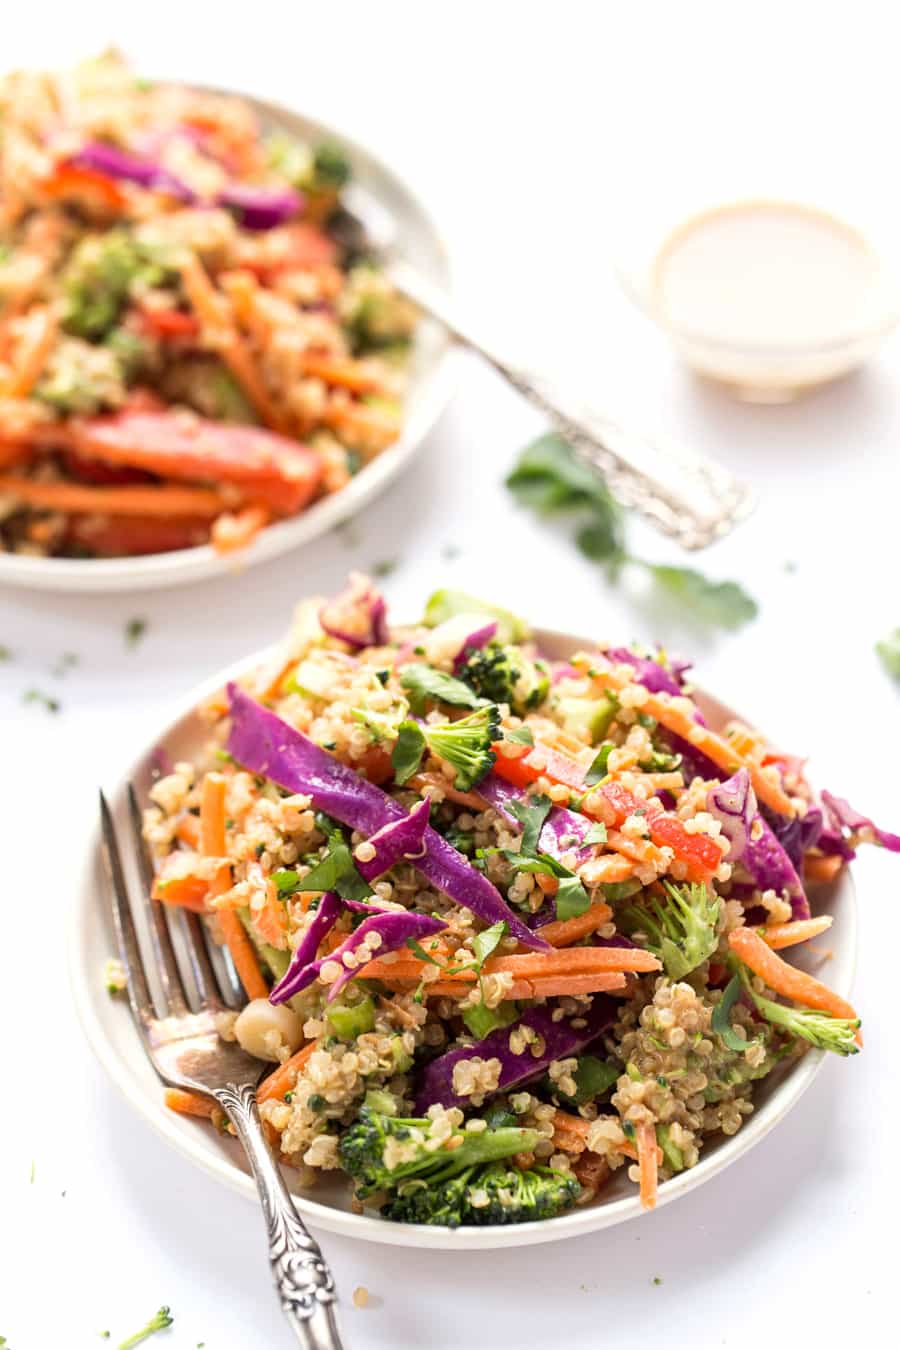 This simple THAI QUINOA SALAD is peppered with a rainbow of veggies and tossed in a creamy almond butter sauce! Tastes like pad thai, but in salad form!